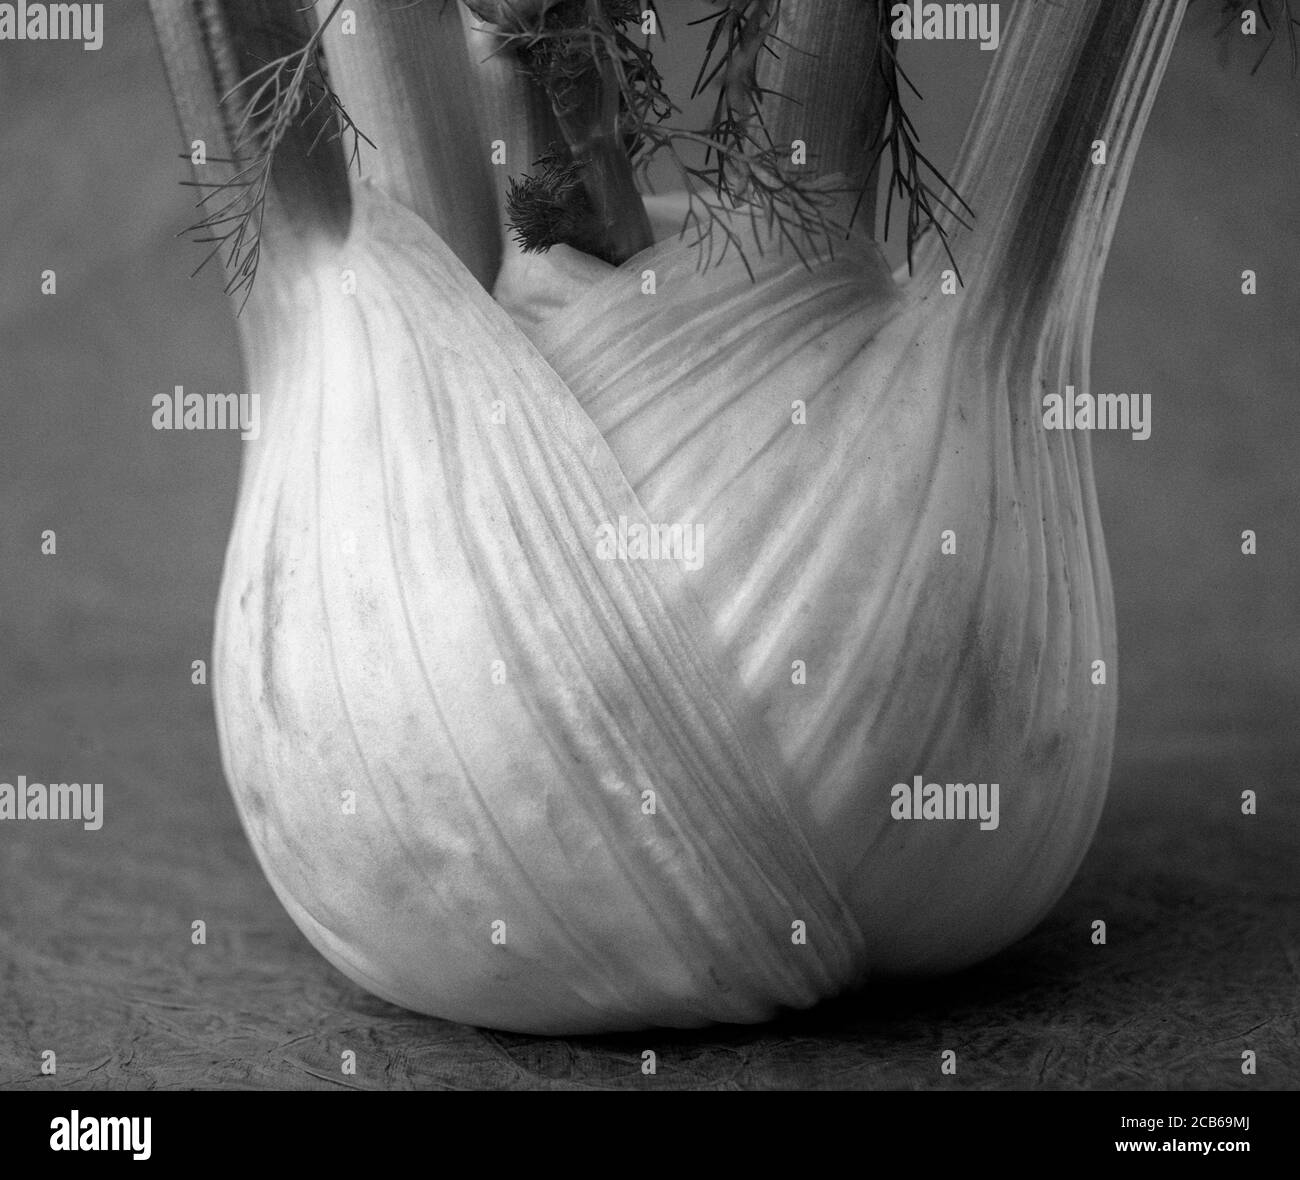 A fennel bulb in close up Stock Photo